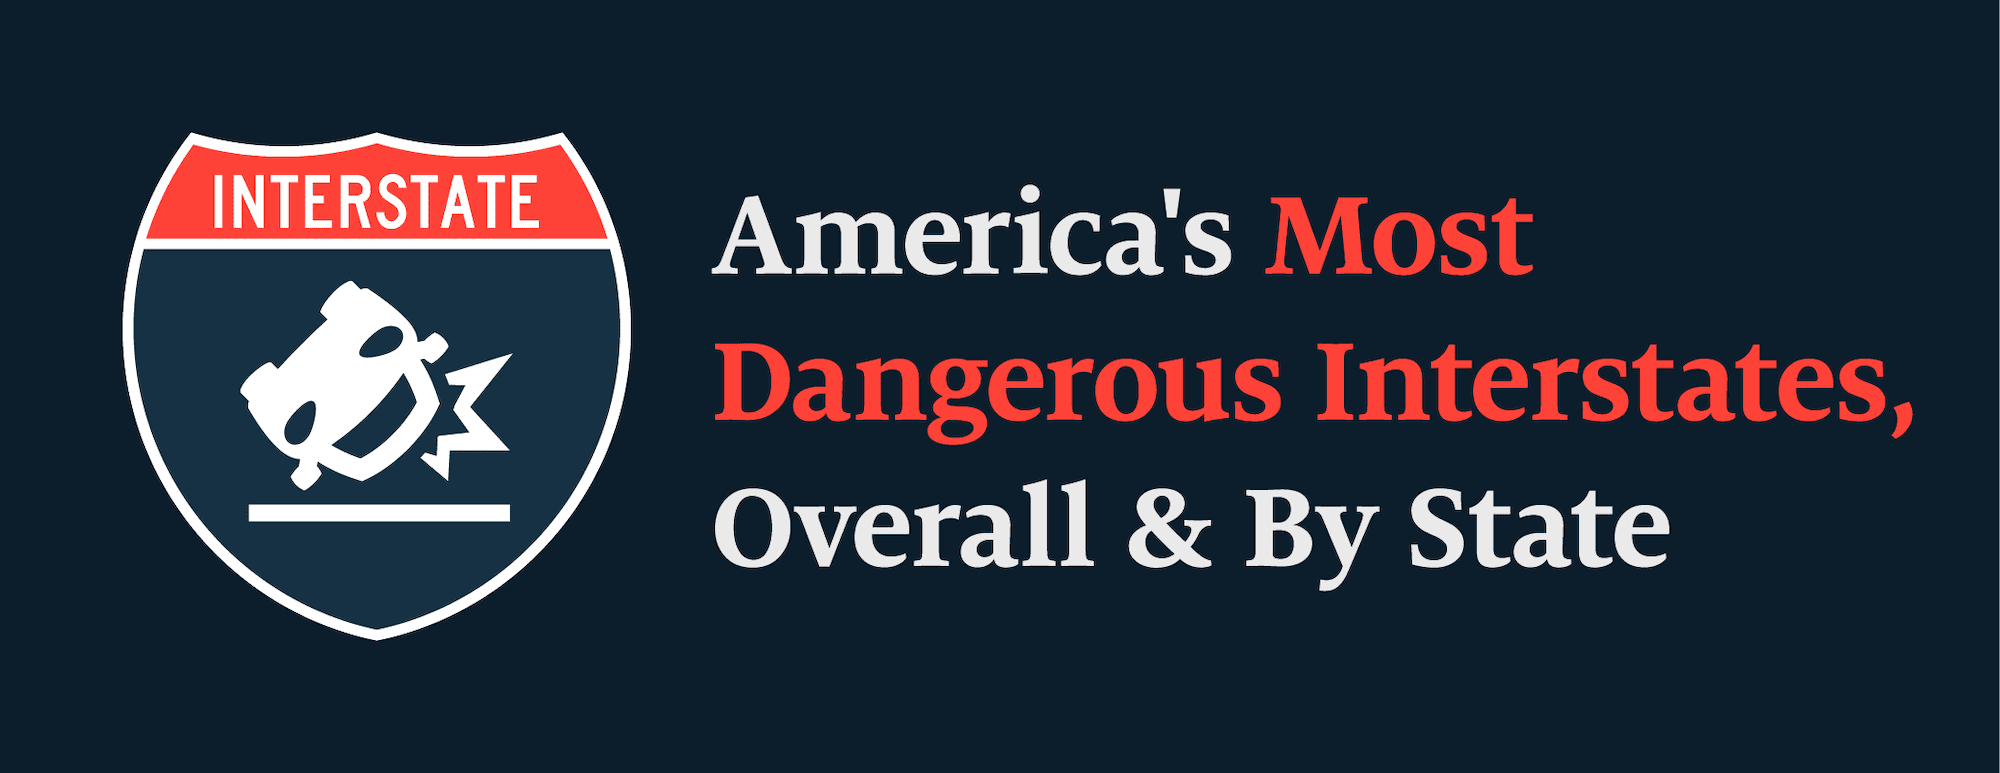 Header Image for blog post about most dangerous interstates in America 